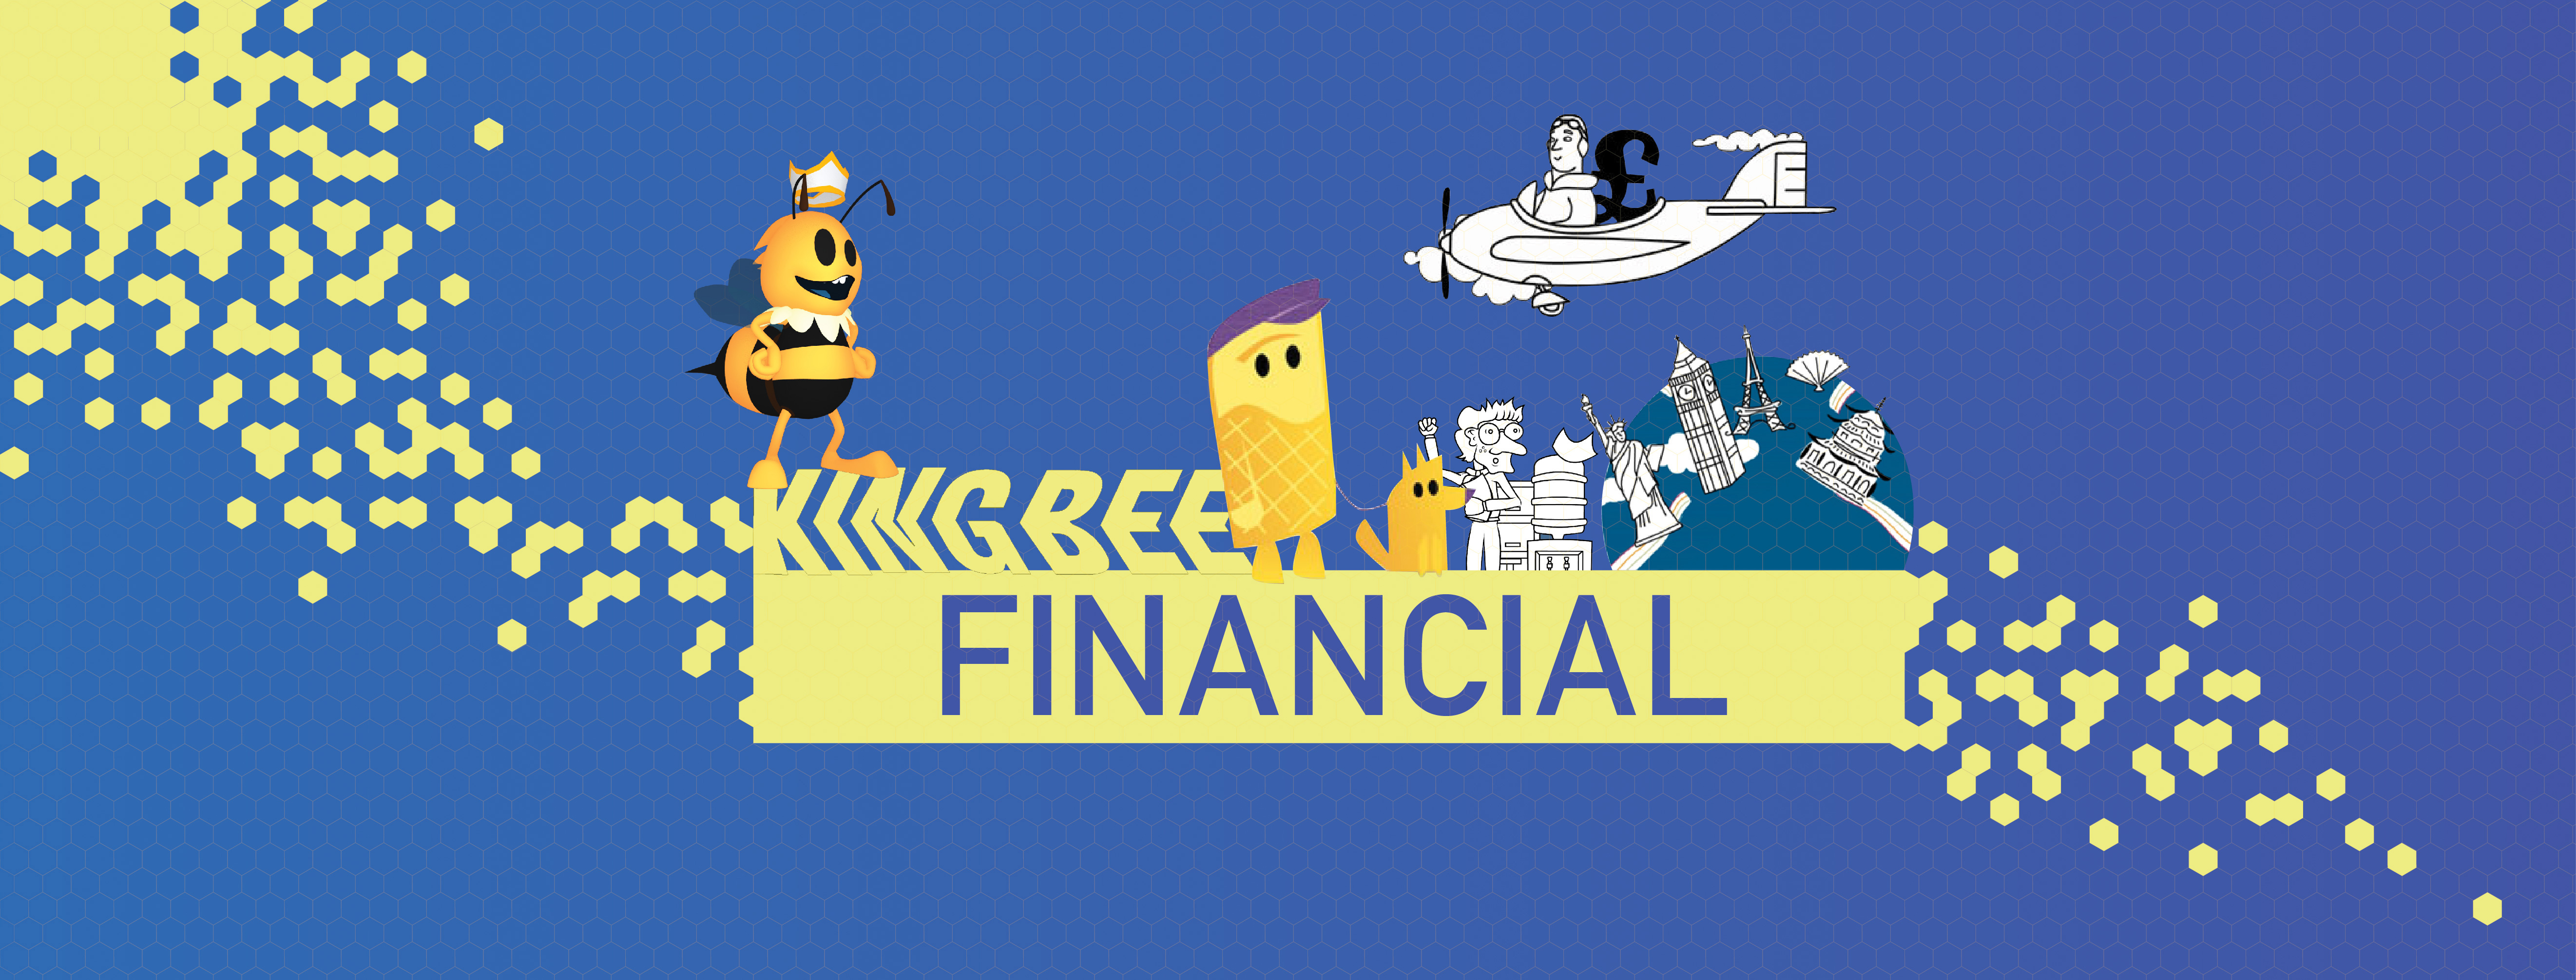 Financial Animations |